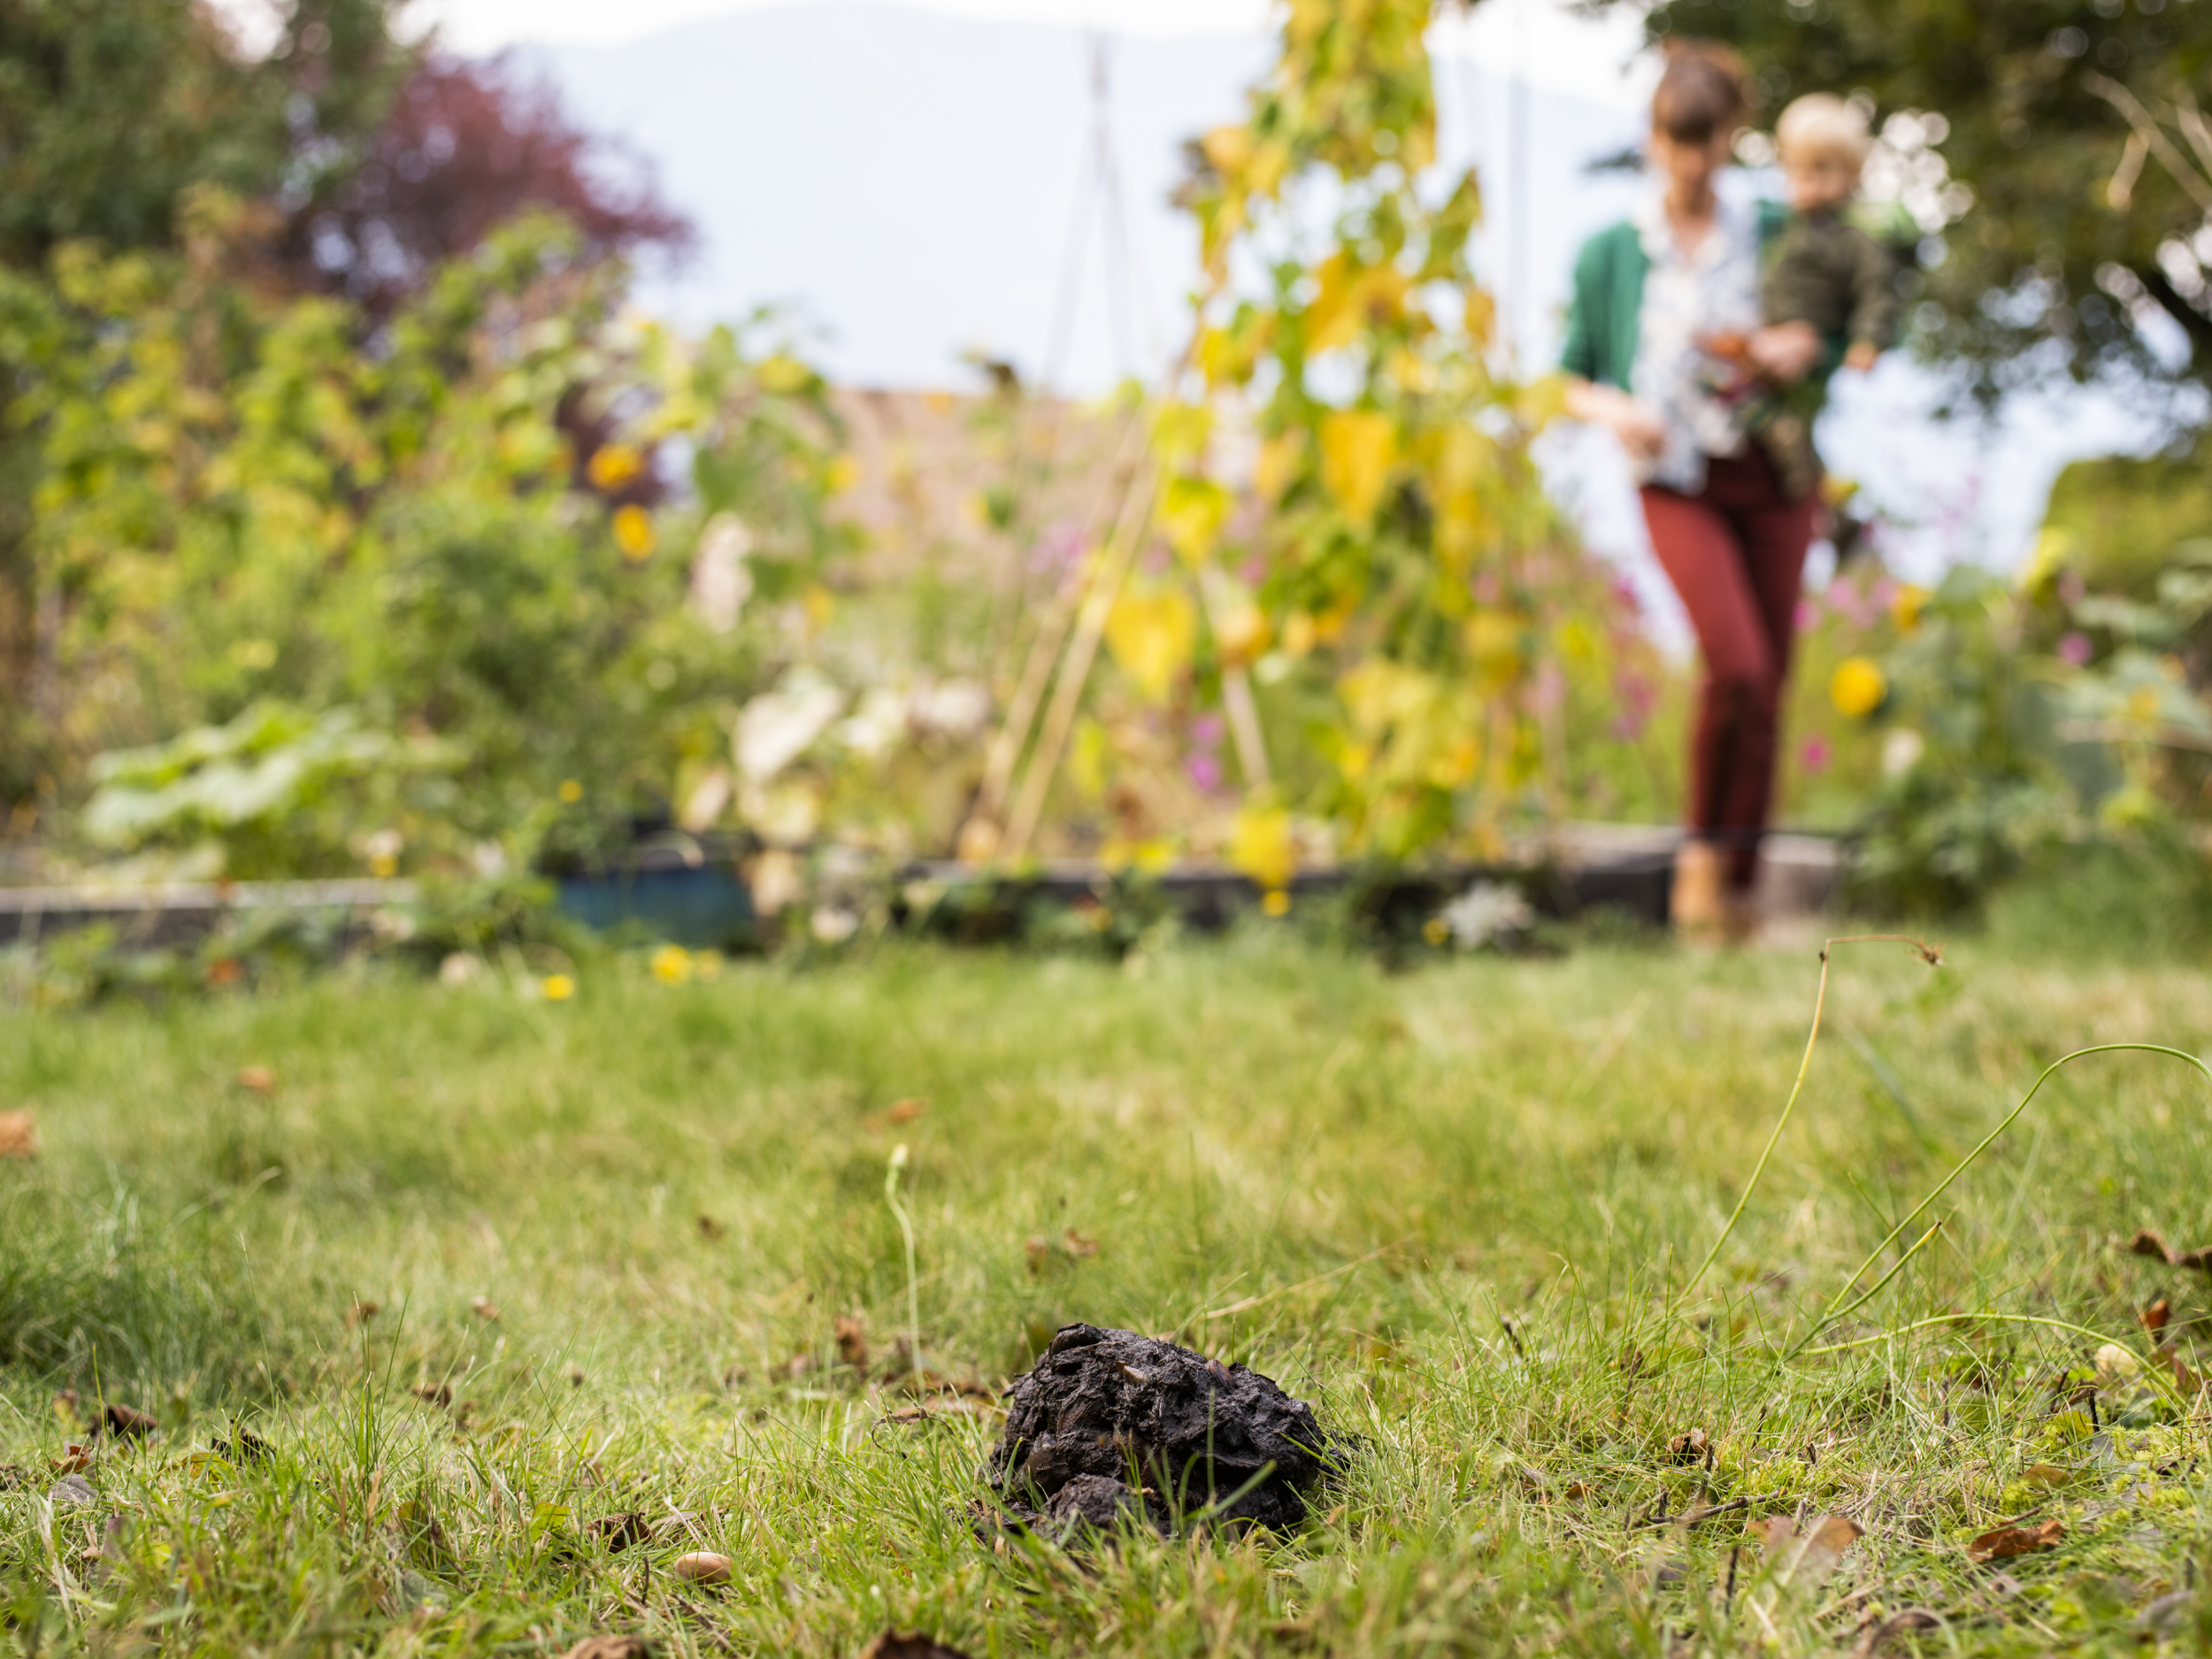 Bear droppings in the back yard of a Nelson, B.C. residence